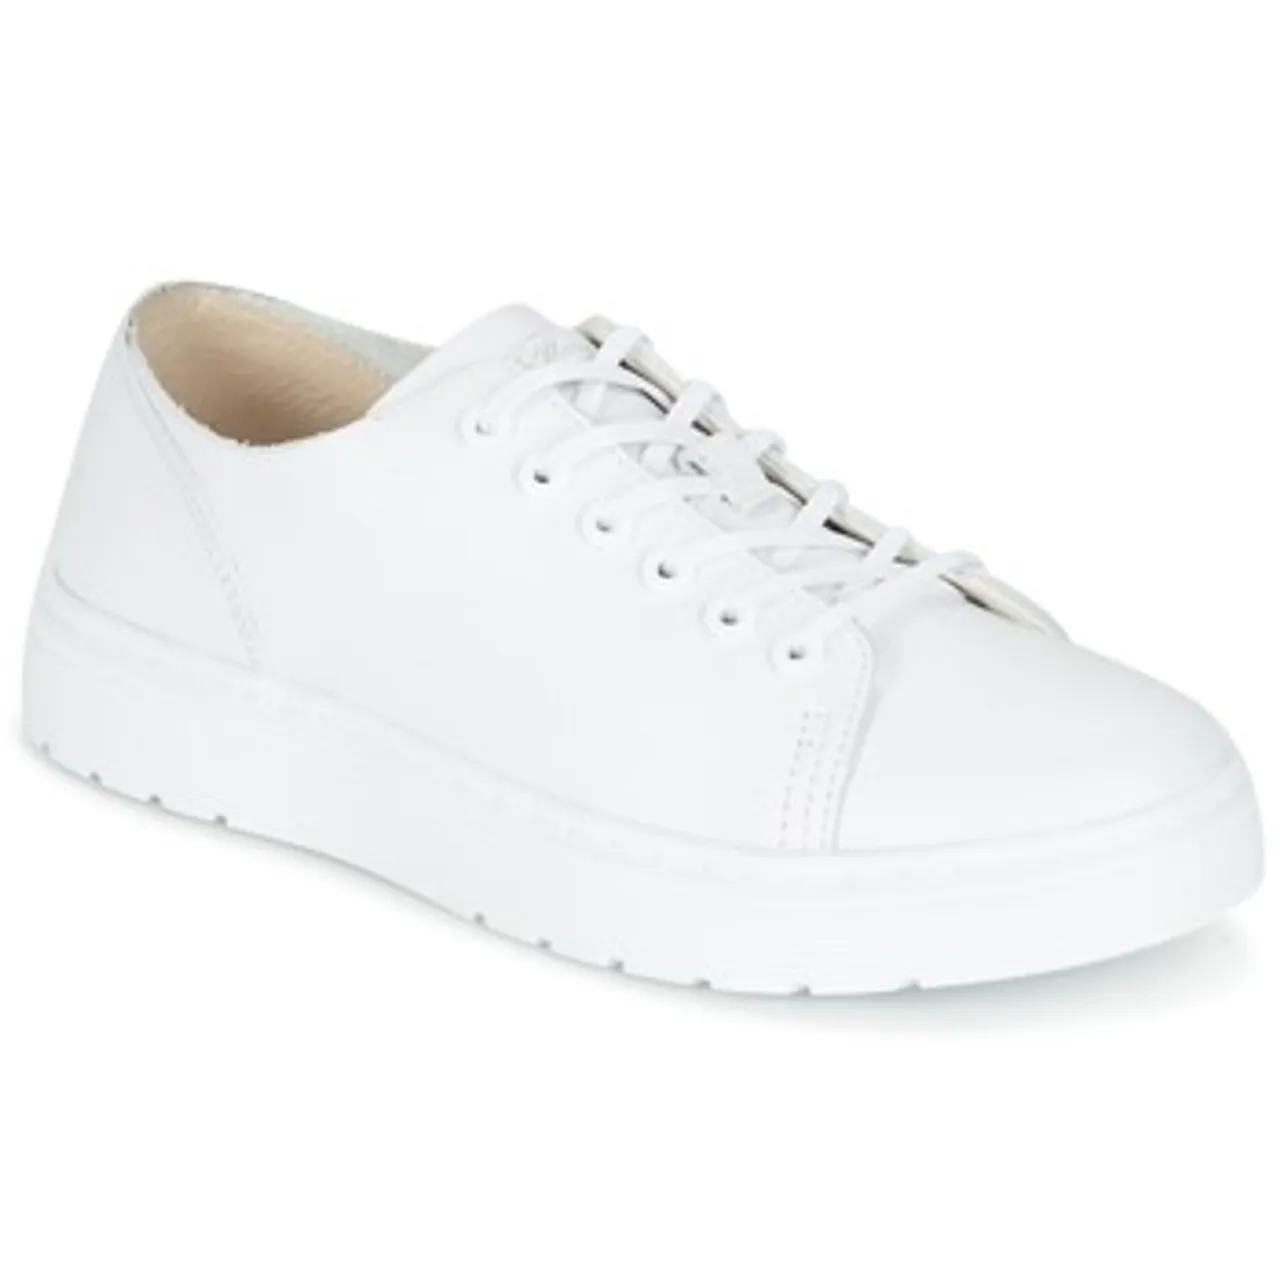 Dr. Martens  DANTE  women's Shoes (Trainers) in White